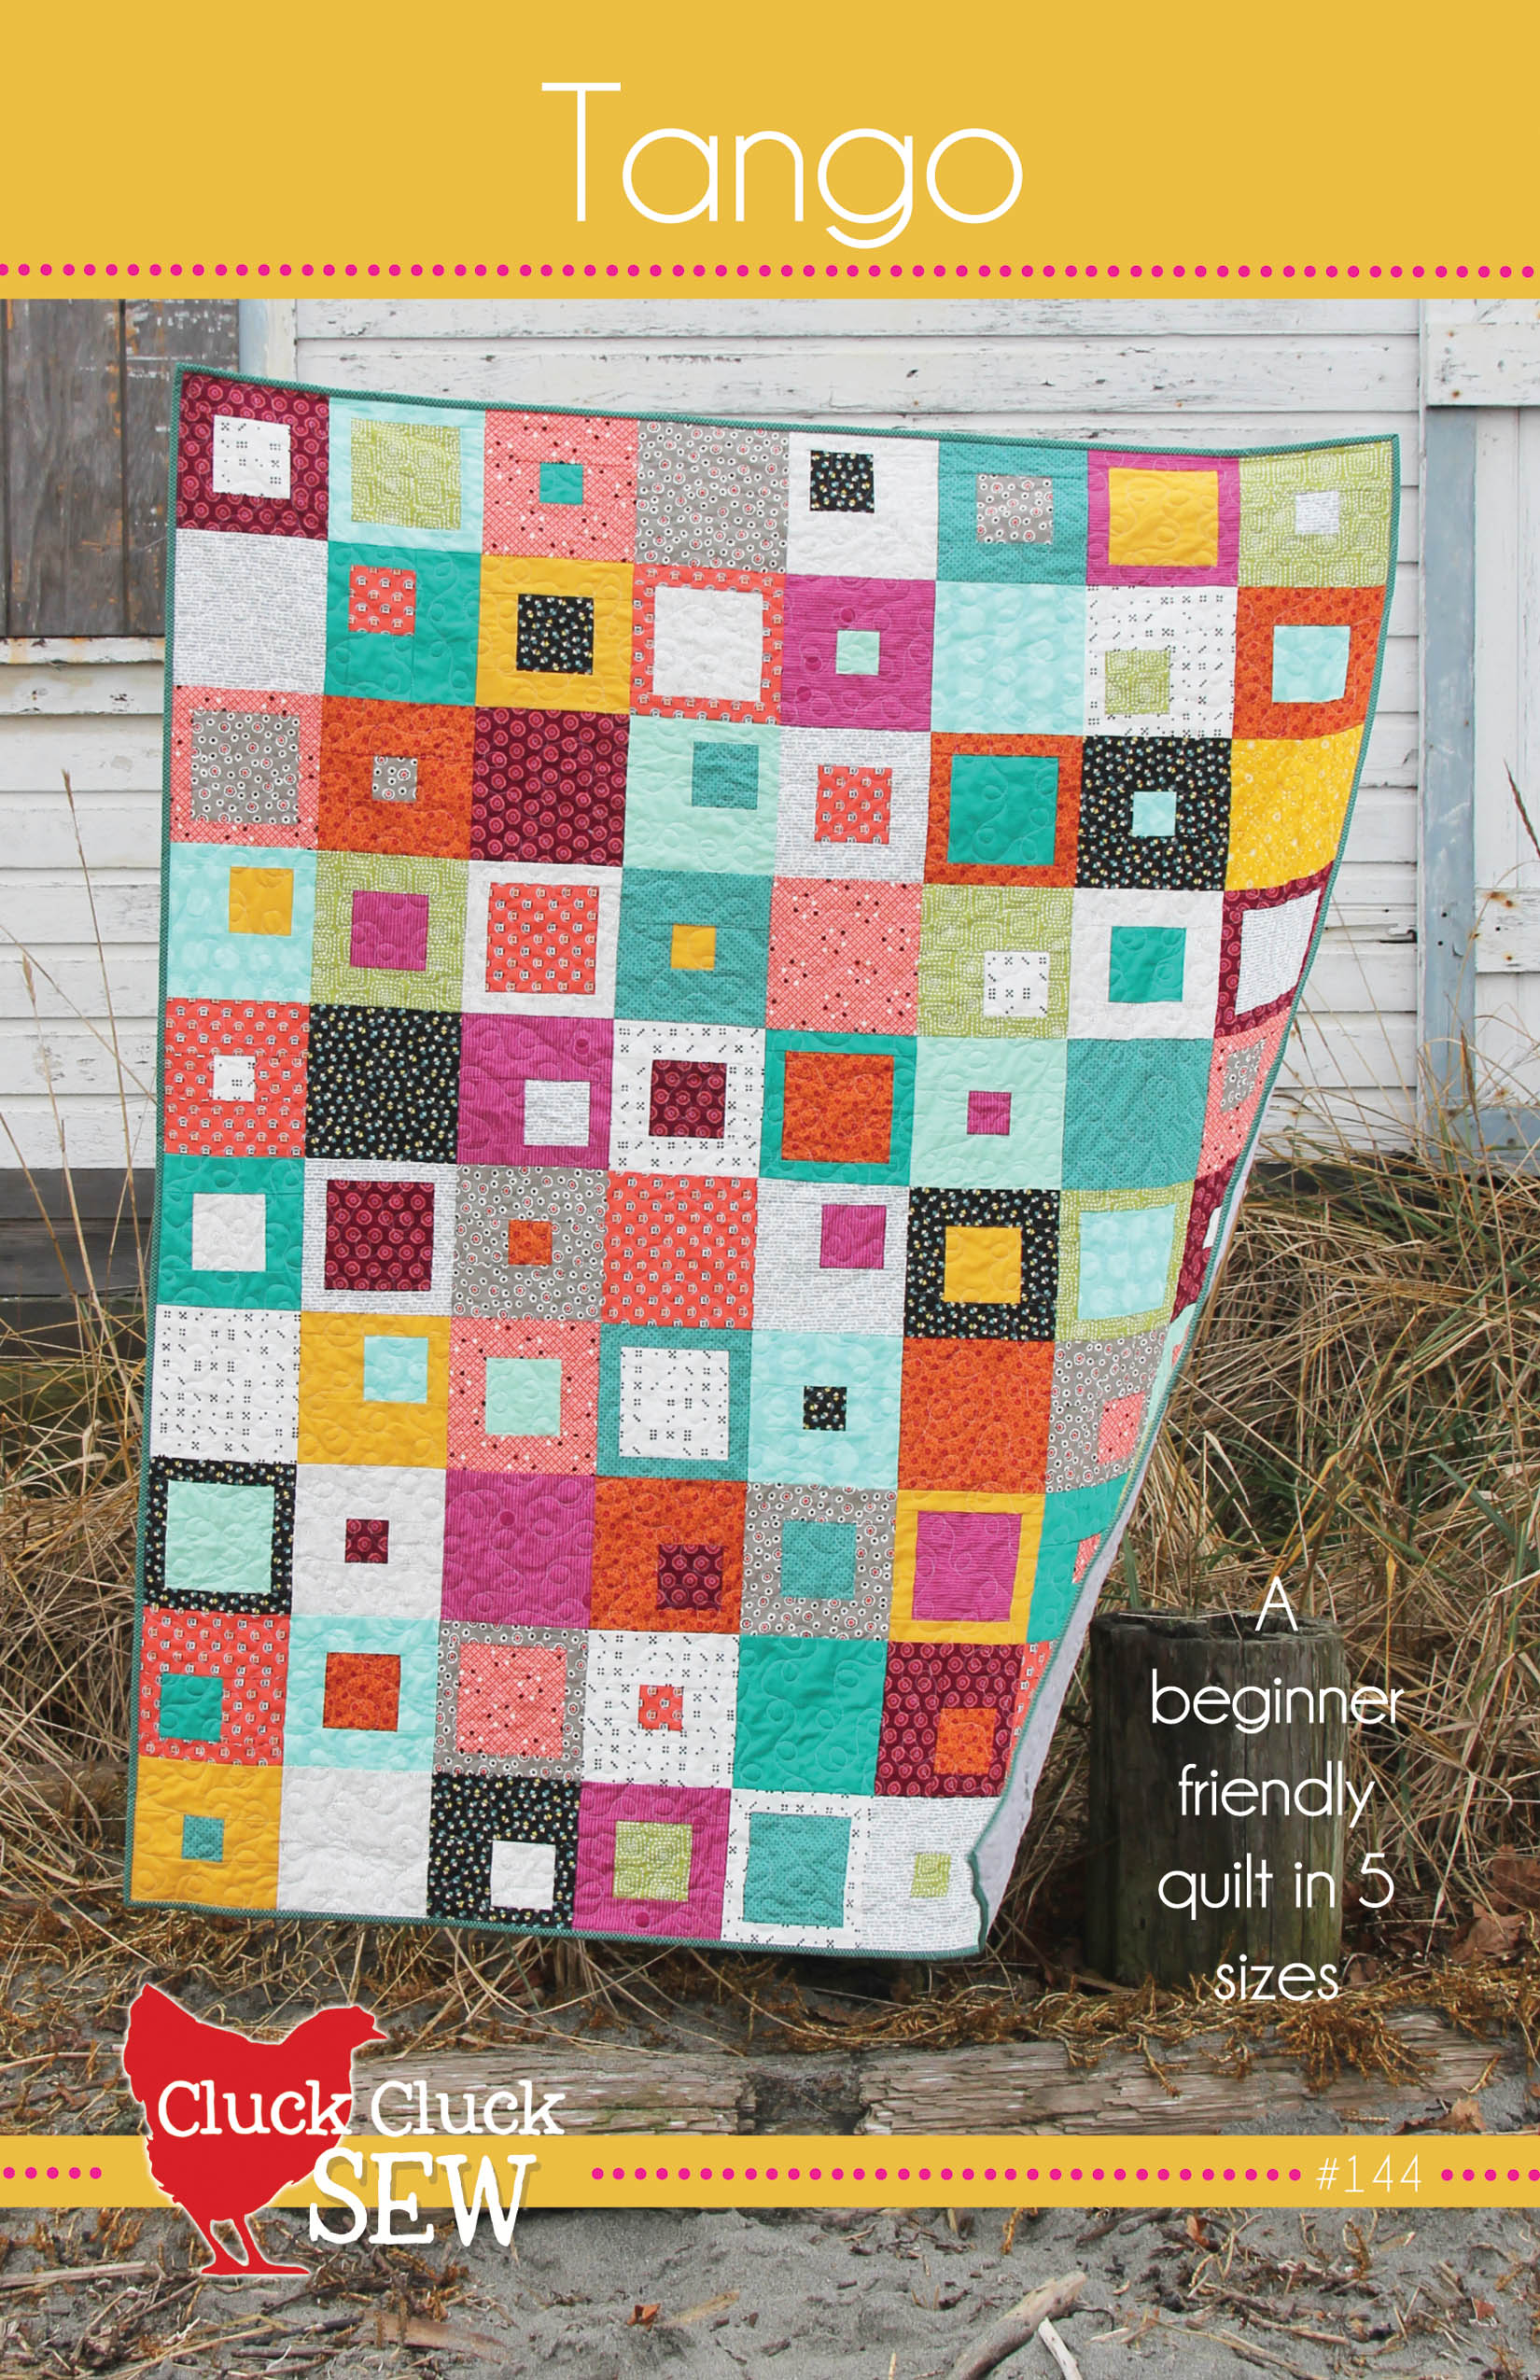 Tango Quilt Pattern by Cluck Cluck Sew